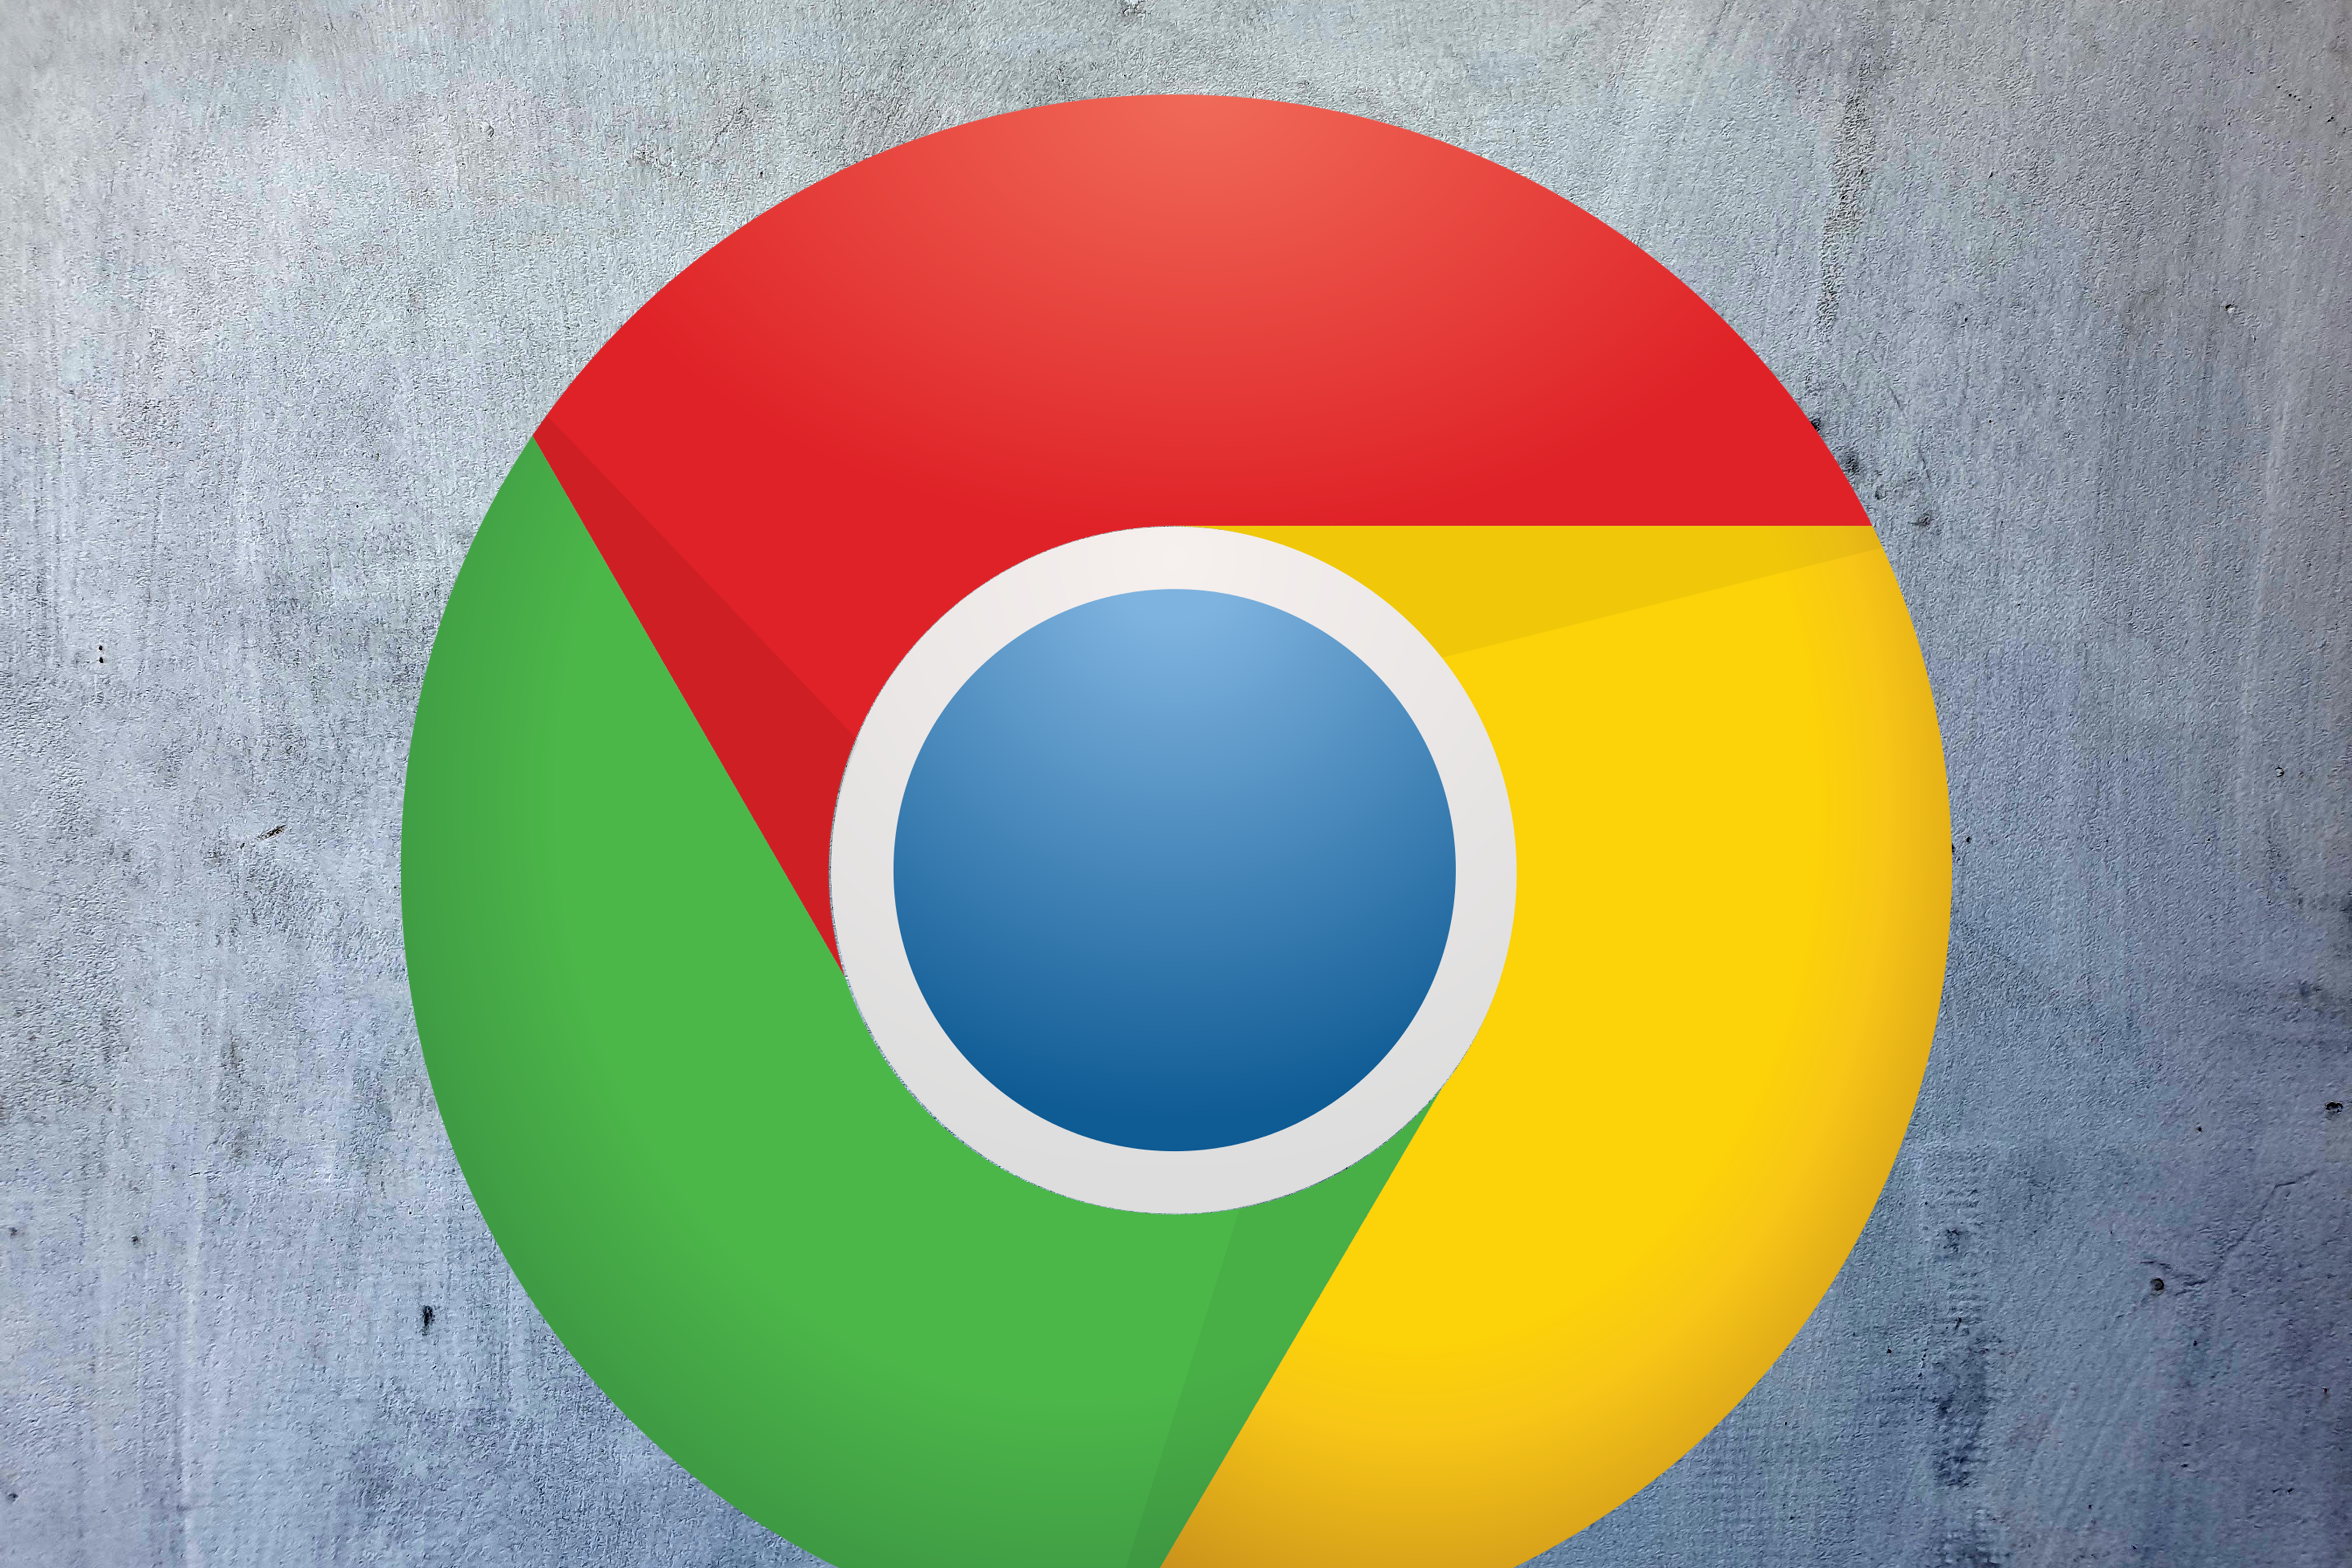 5 free Chrome browser extensions we can’t dwell without